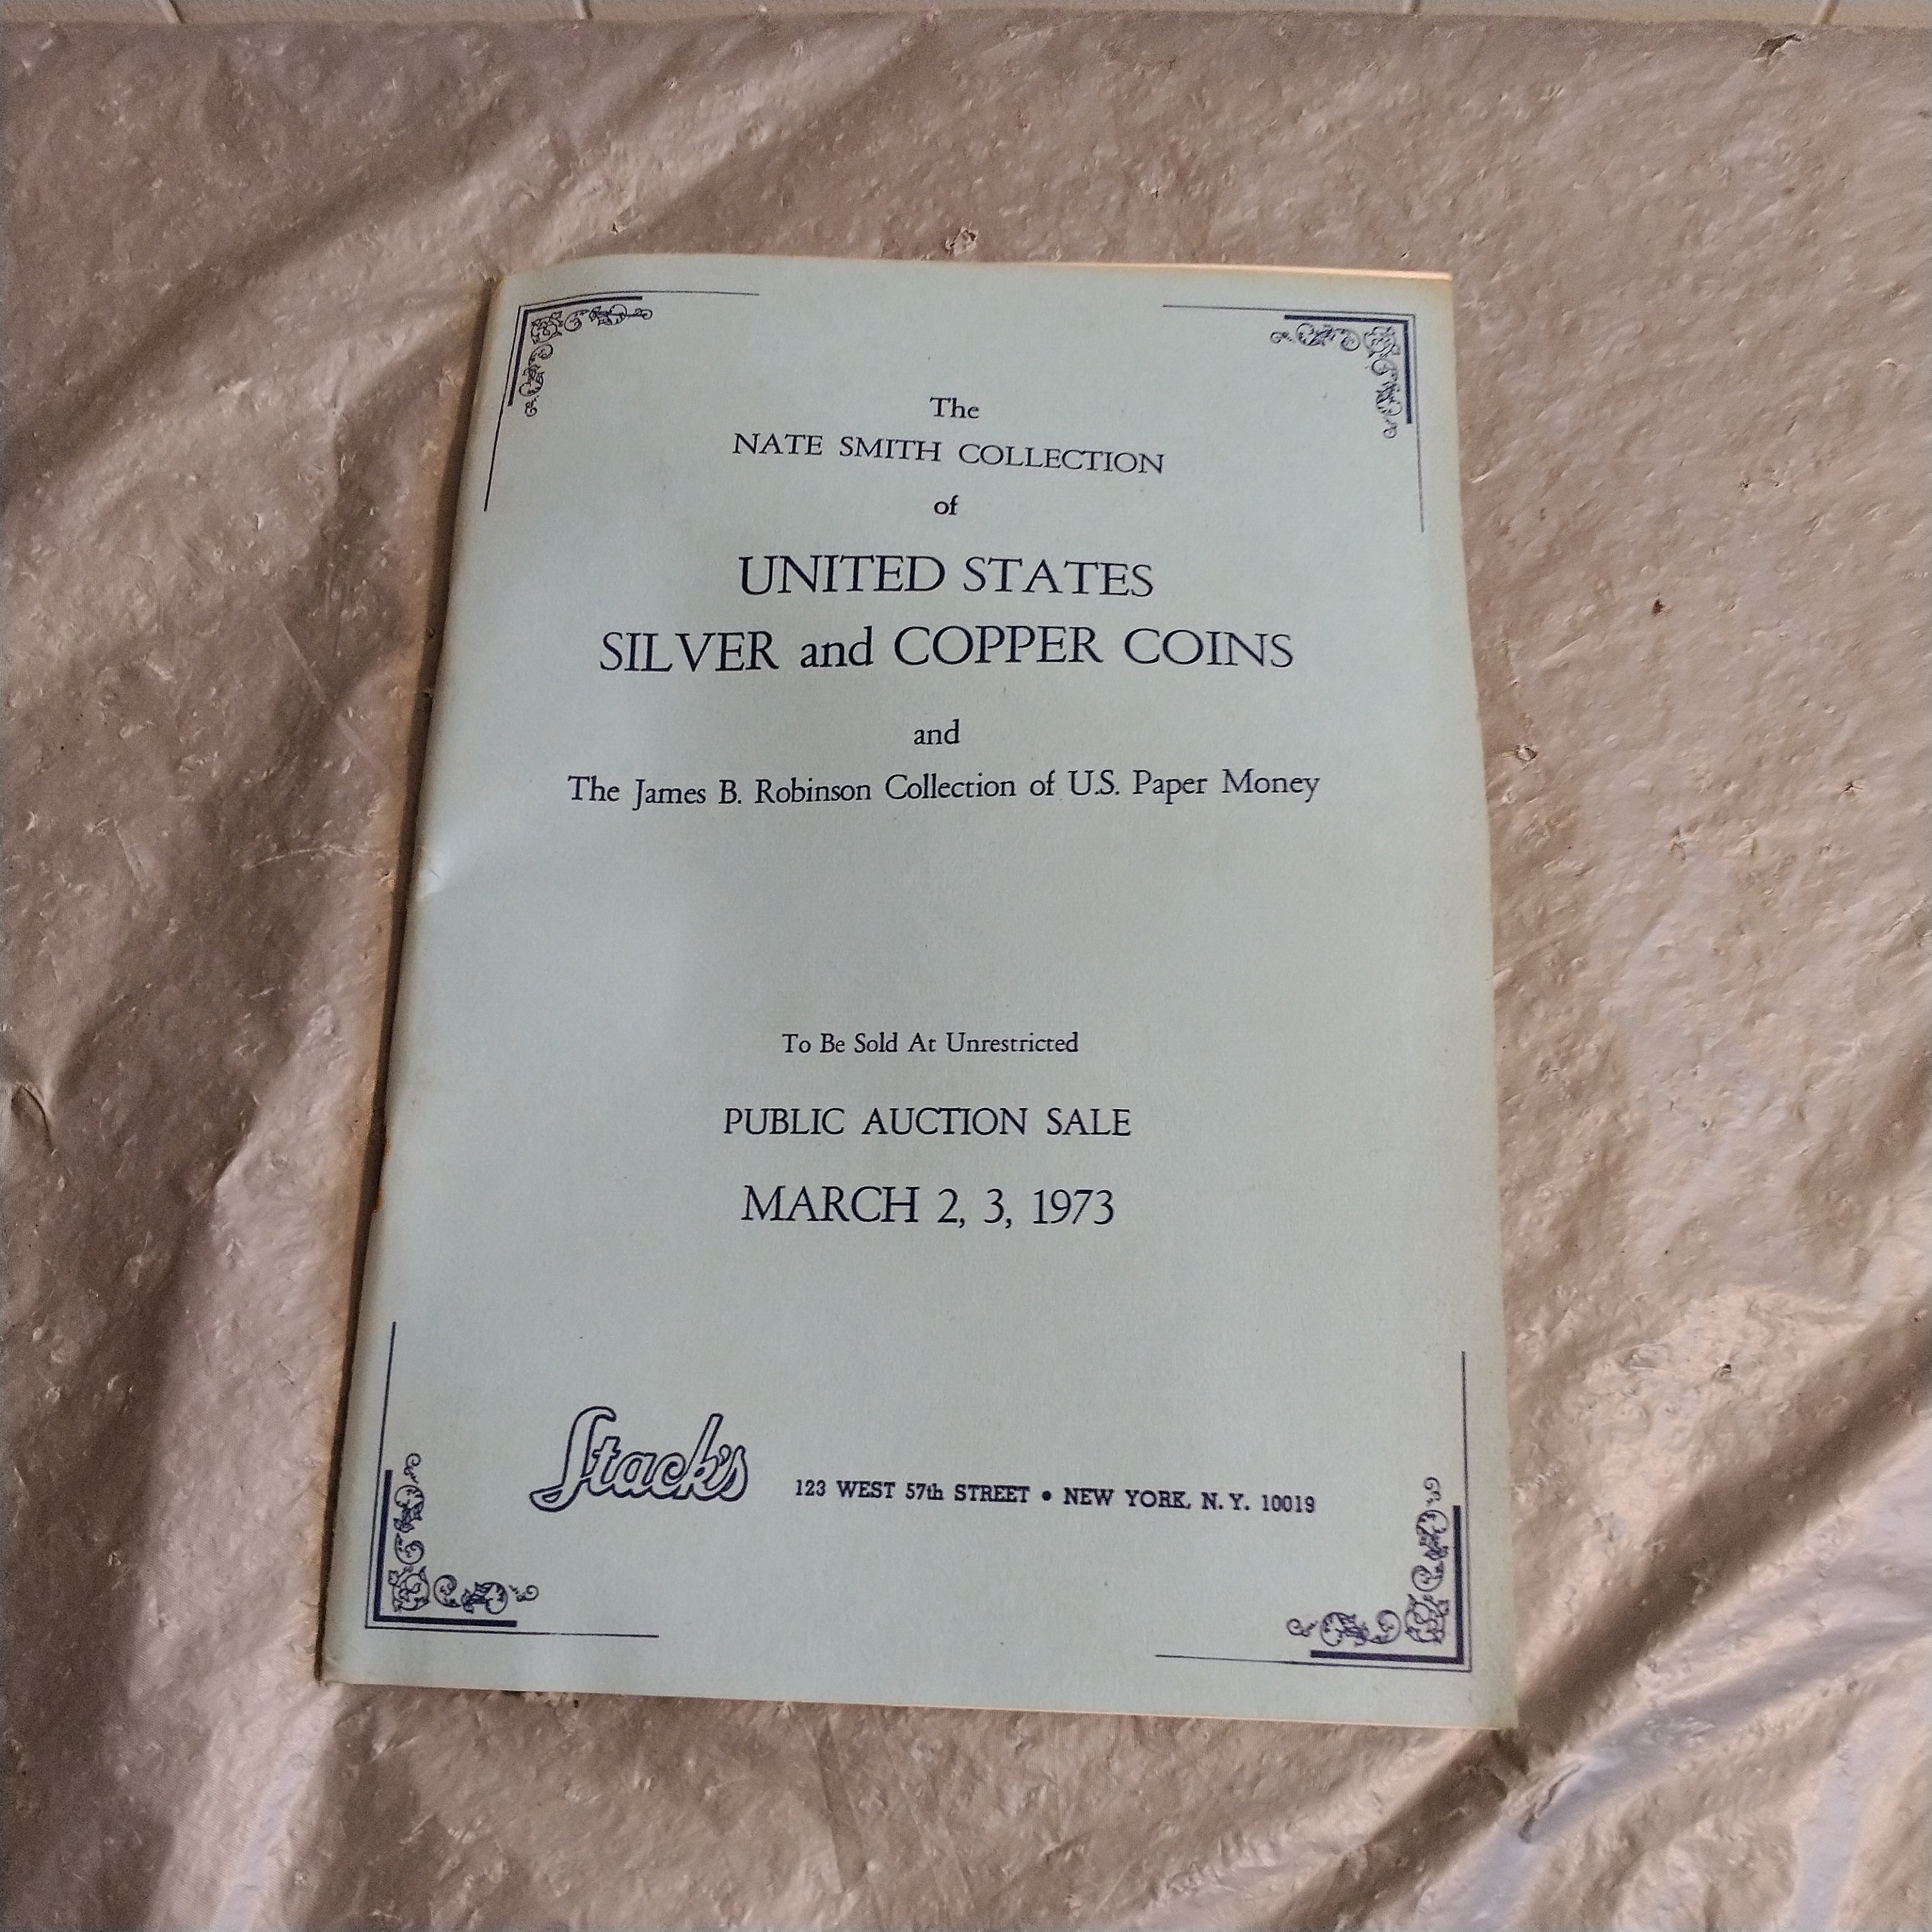 Four Books for Coin Collectors, 1968-1972 